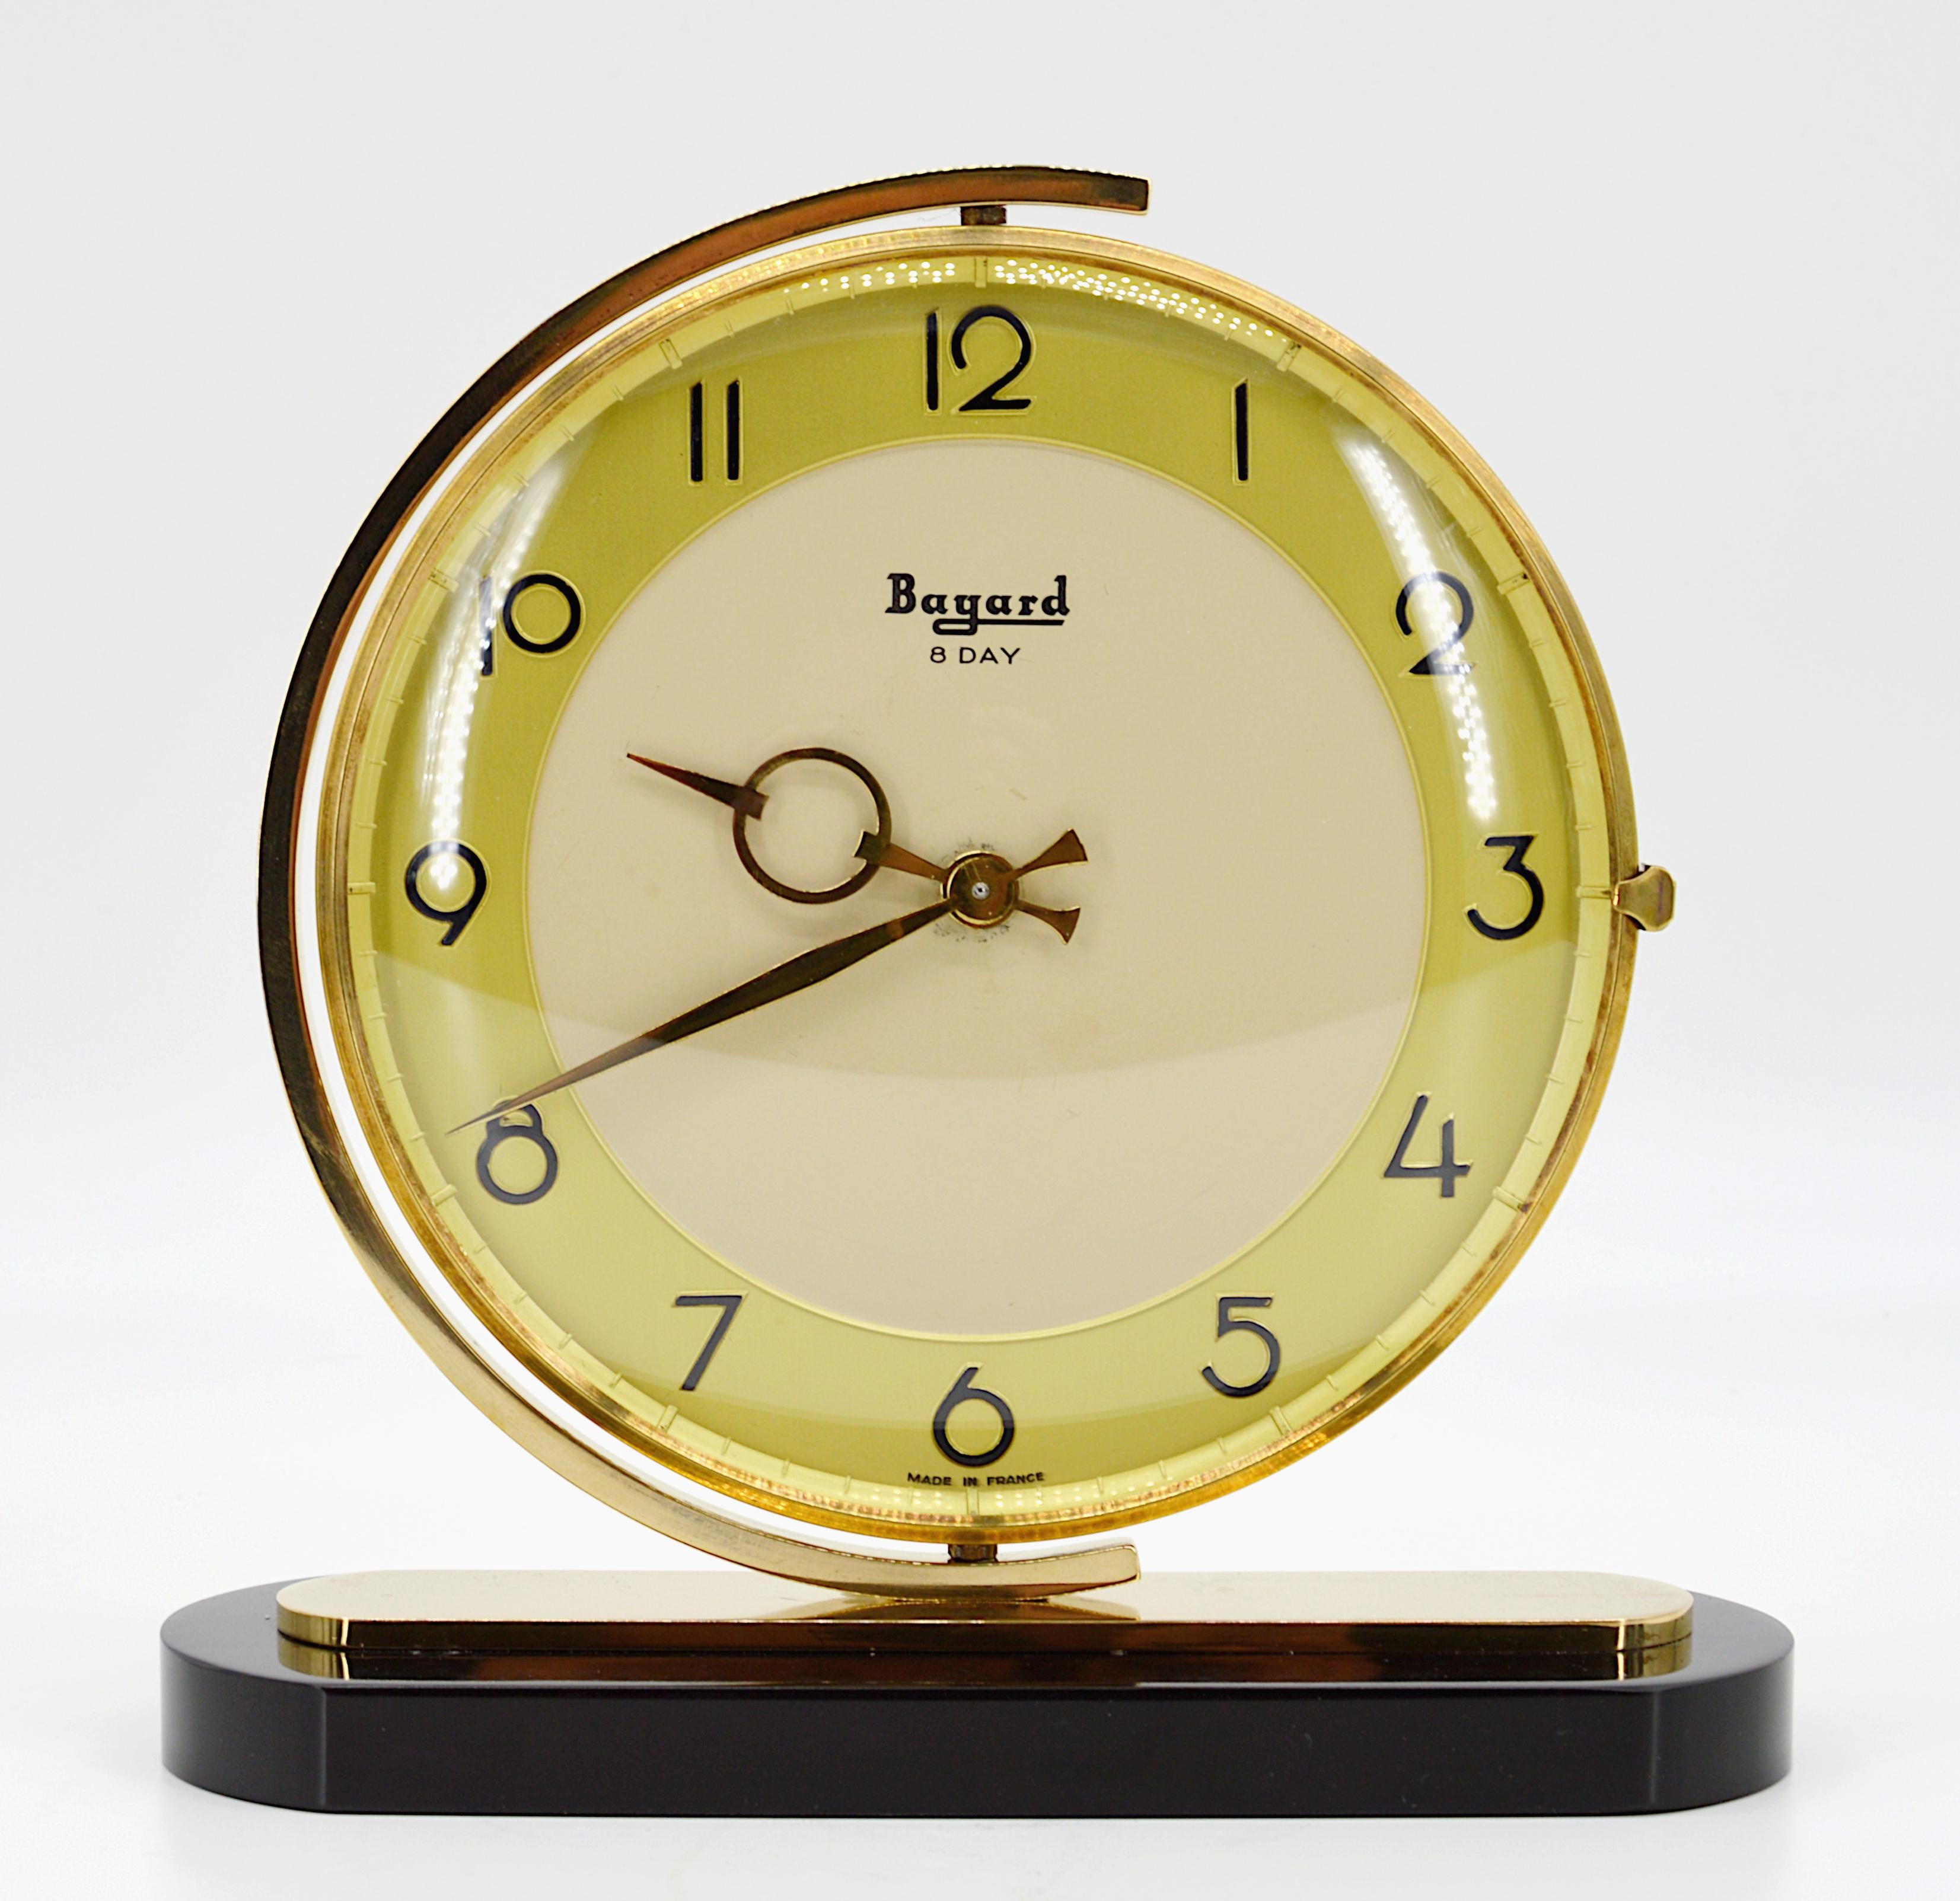 French Art Deco table clock by Bayard, France, 1930s. Brass, marble and glass. Swivel brass dial. Marble base. Rounded glass. 8 days movement. Measures: Height 7.5